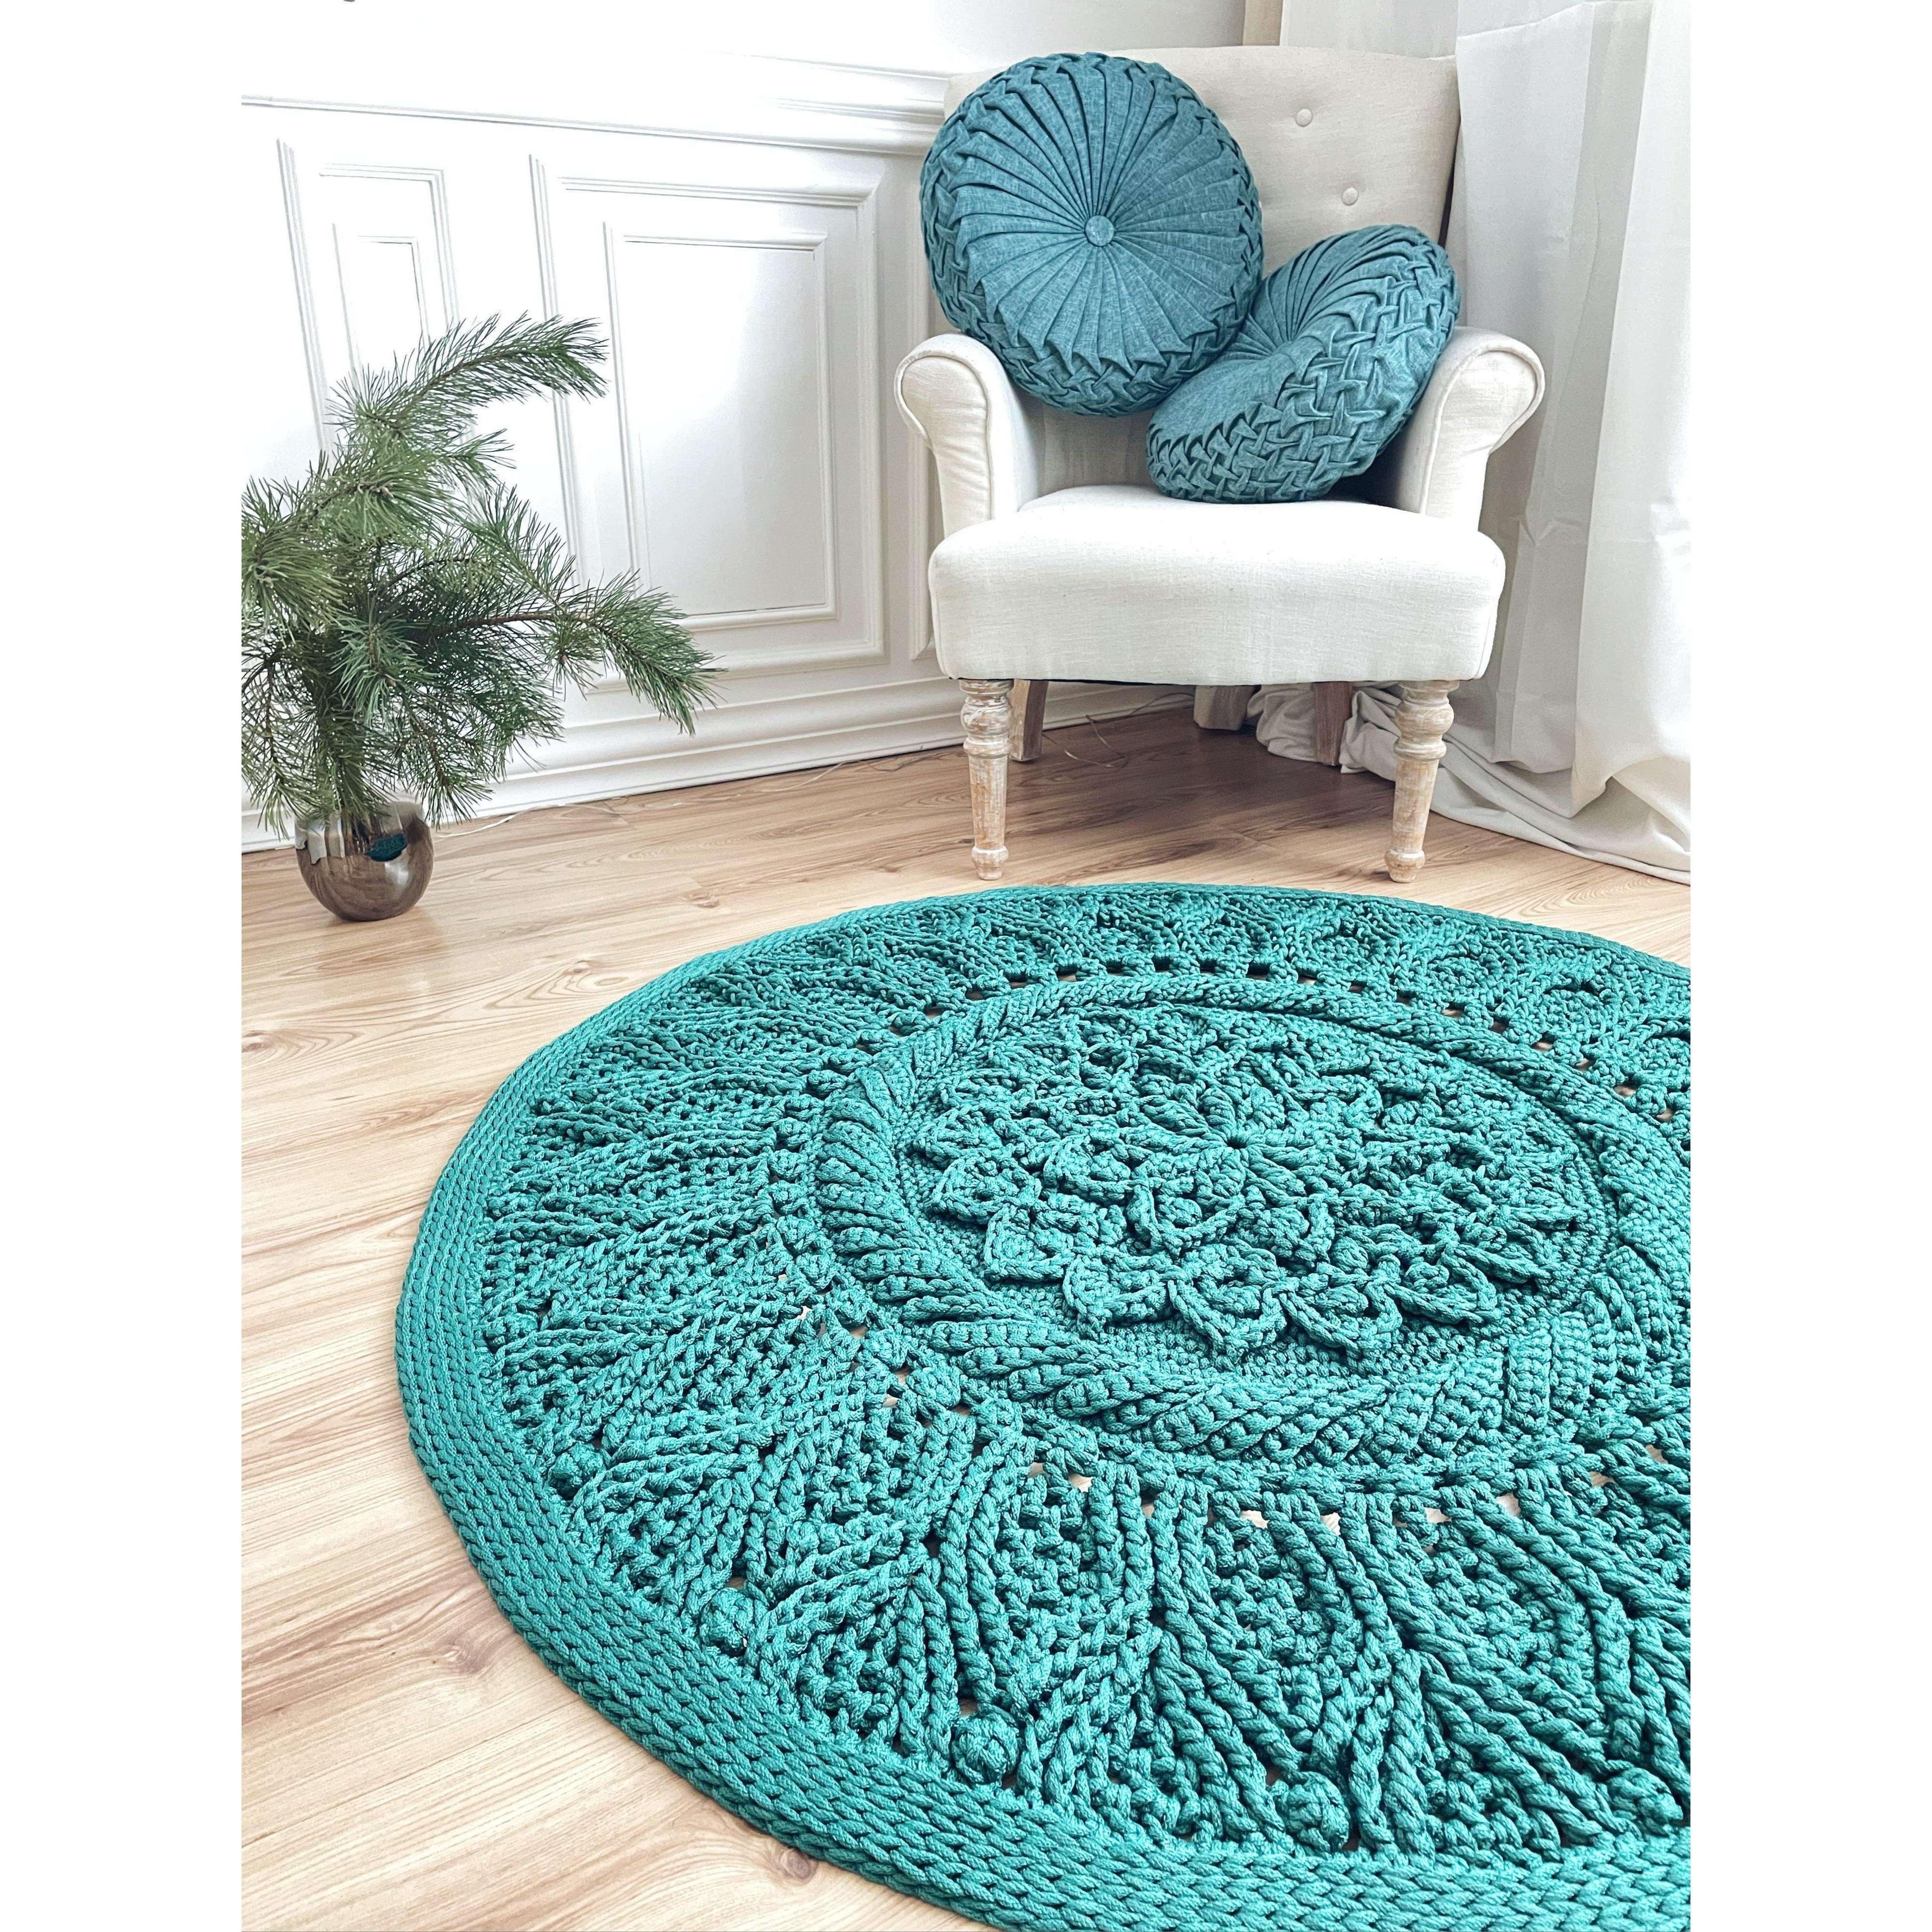 Crochet Rug - Magnolia - TheMailoDesign - Rugs - TheMailoDesign